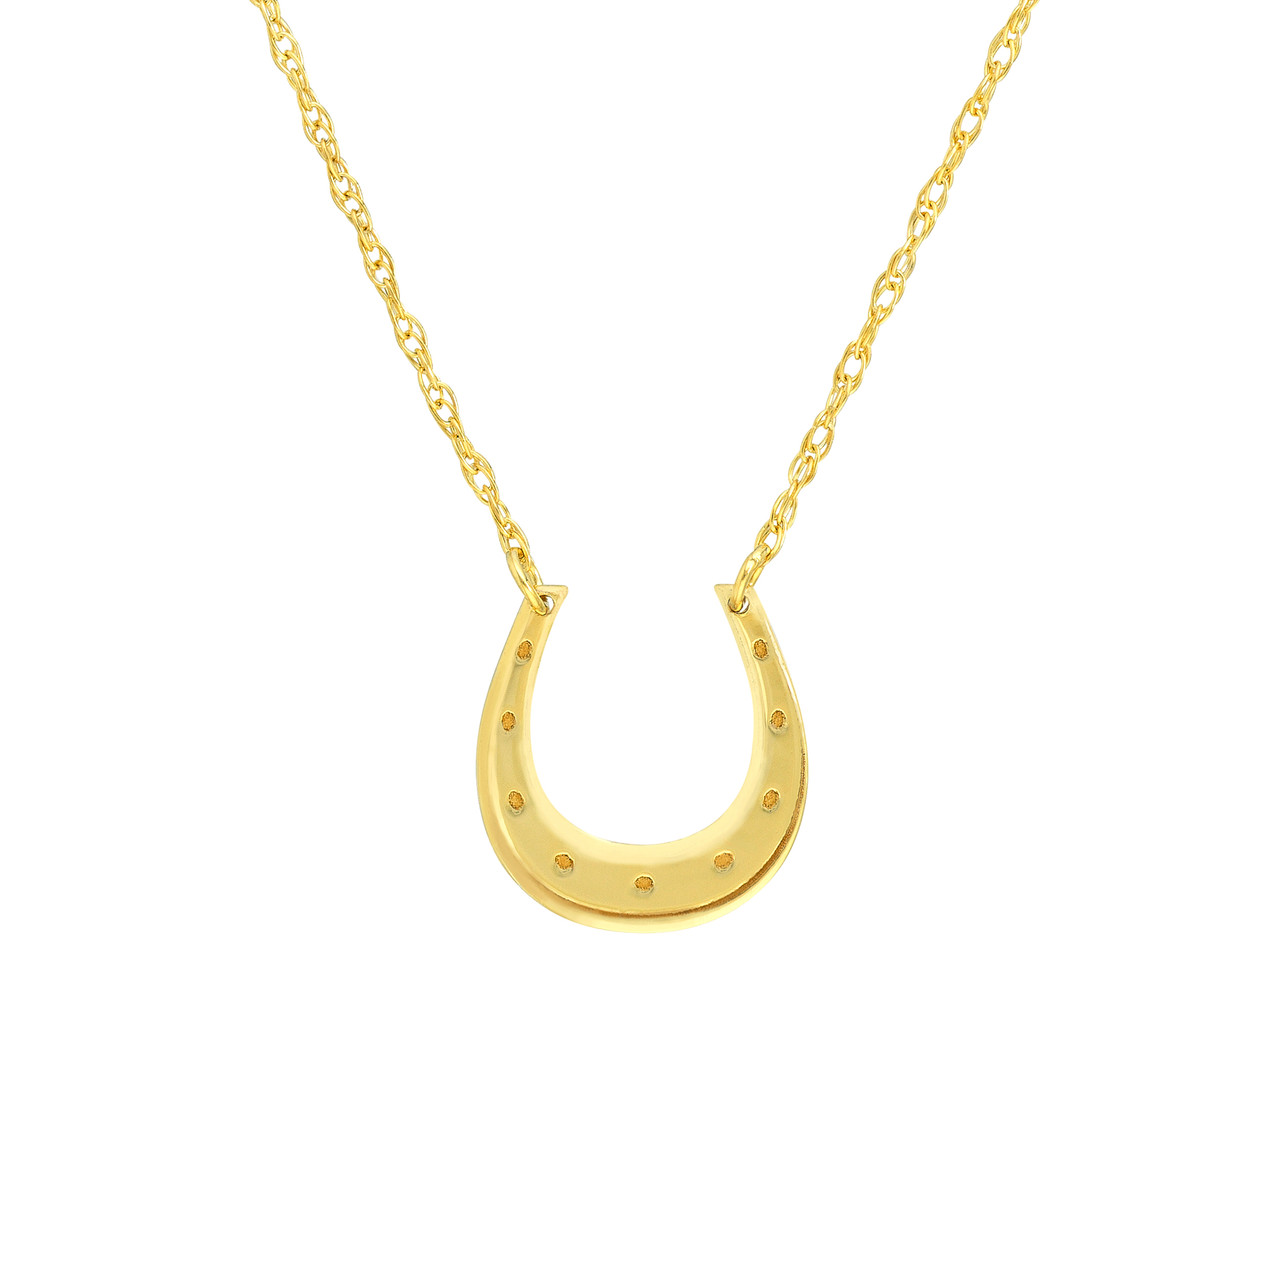 Yellow Gold So You Mini Horse Shoe Adjustable Necklace l 18 inches